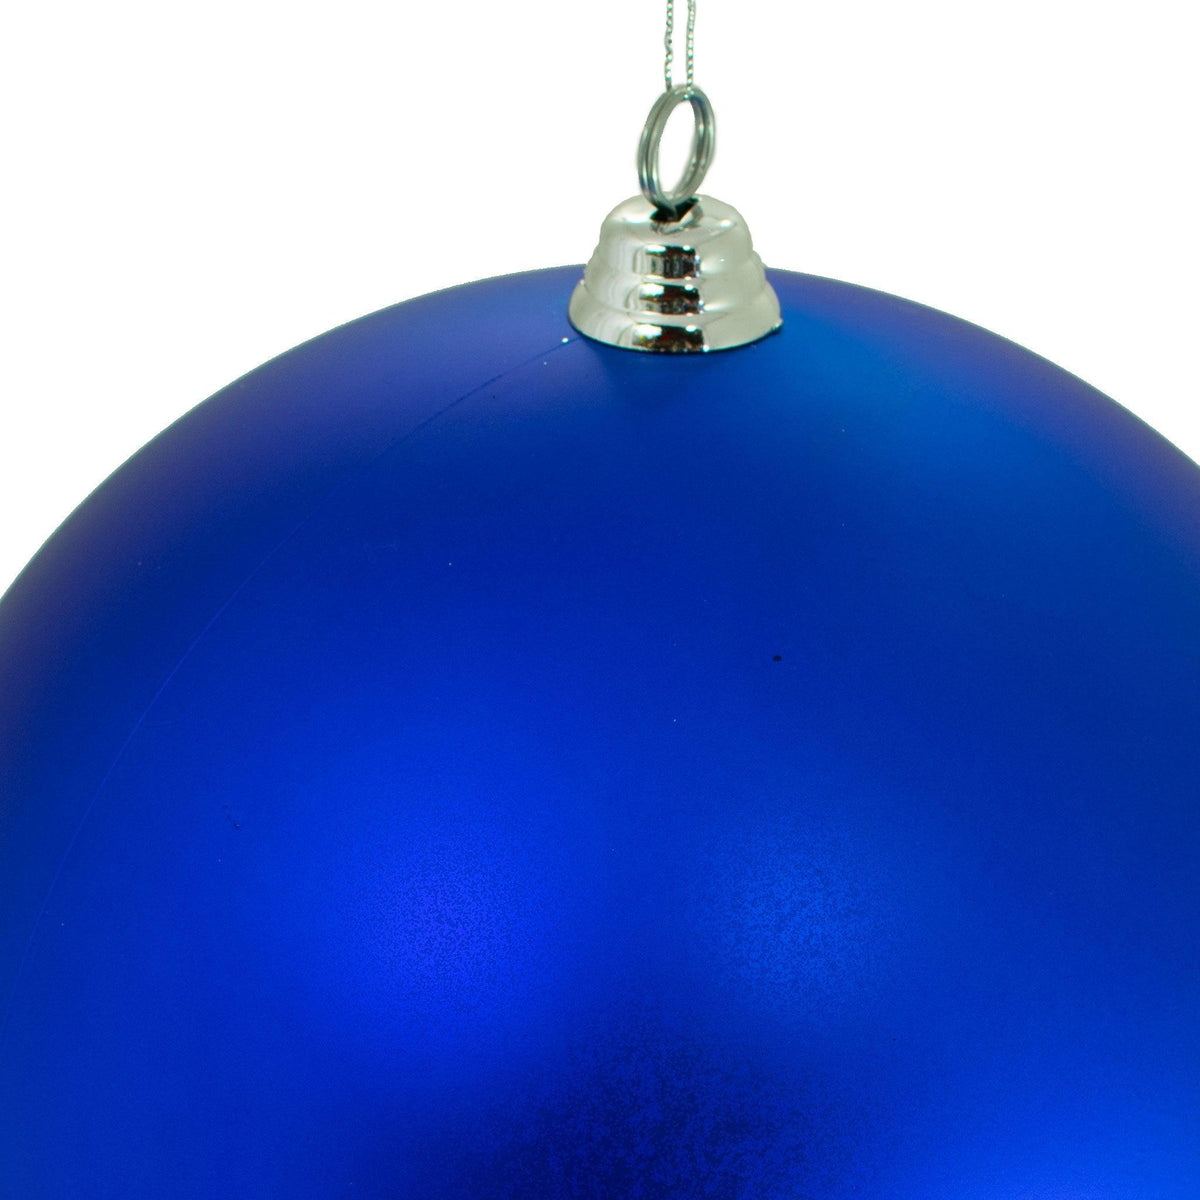 Top of the ornament with a silver cap and hanging string.